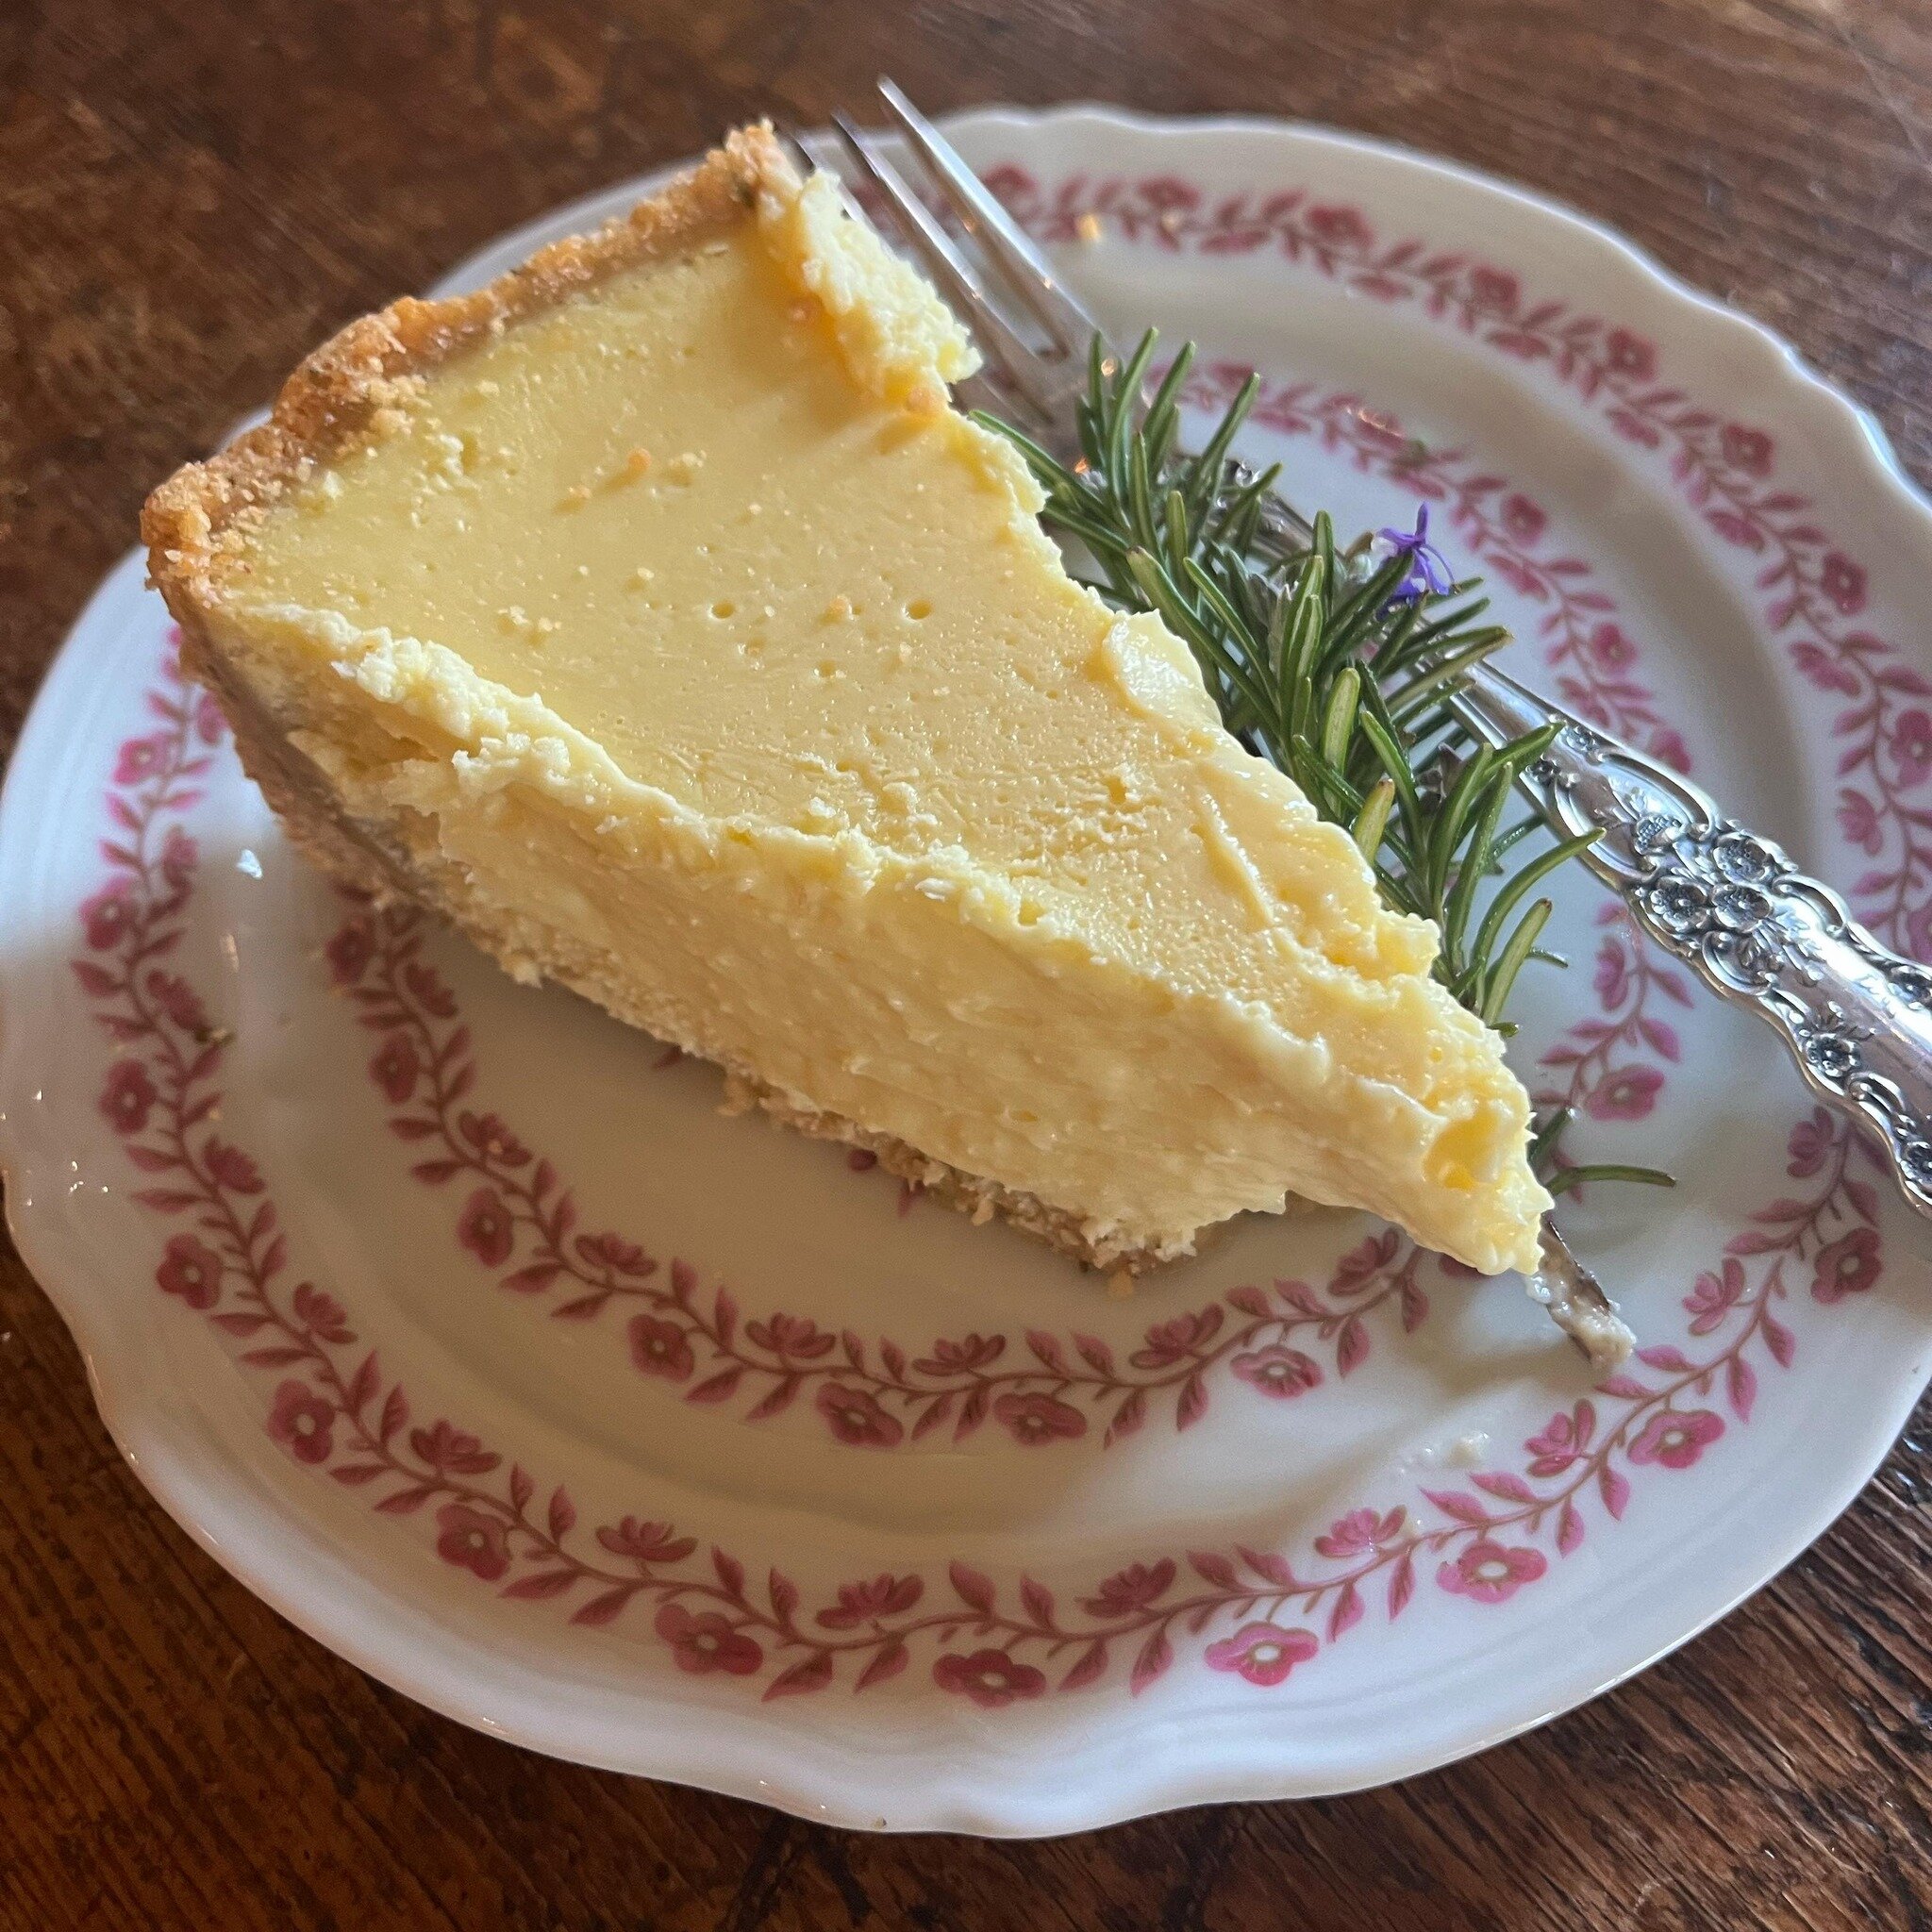 We tested out The Cheese Shop of Portland&rsquo;s goat cheesecake recipe made with our fresh ch&egrave;vre for ourselves and it was divine. It&rsquo;s everything a cheesecake should be - a decadent dessert that&rsquo;s not too sweet. You can find the